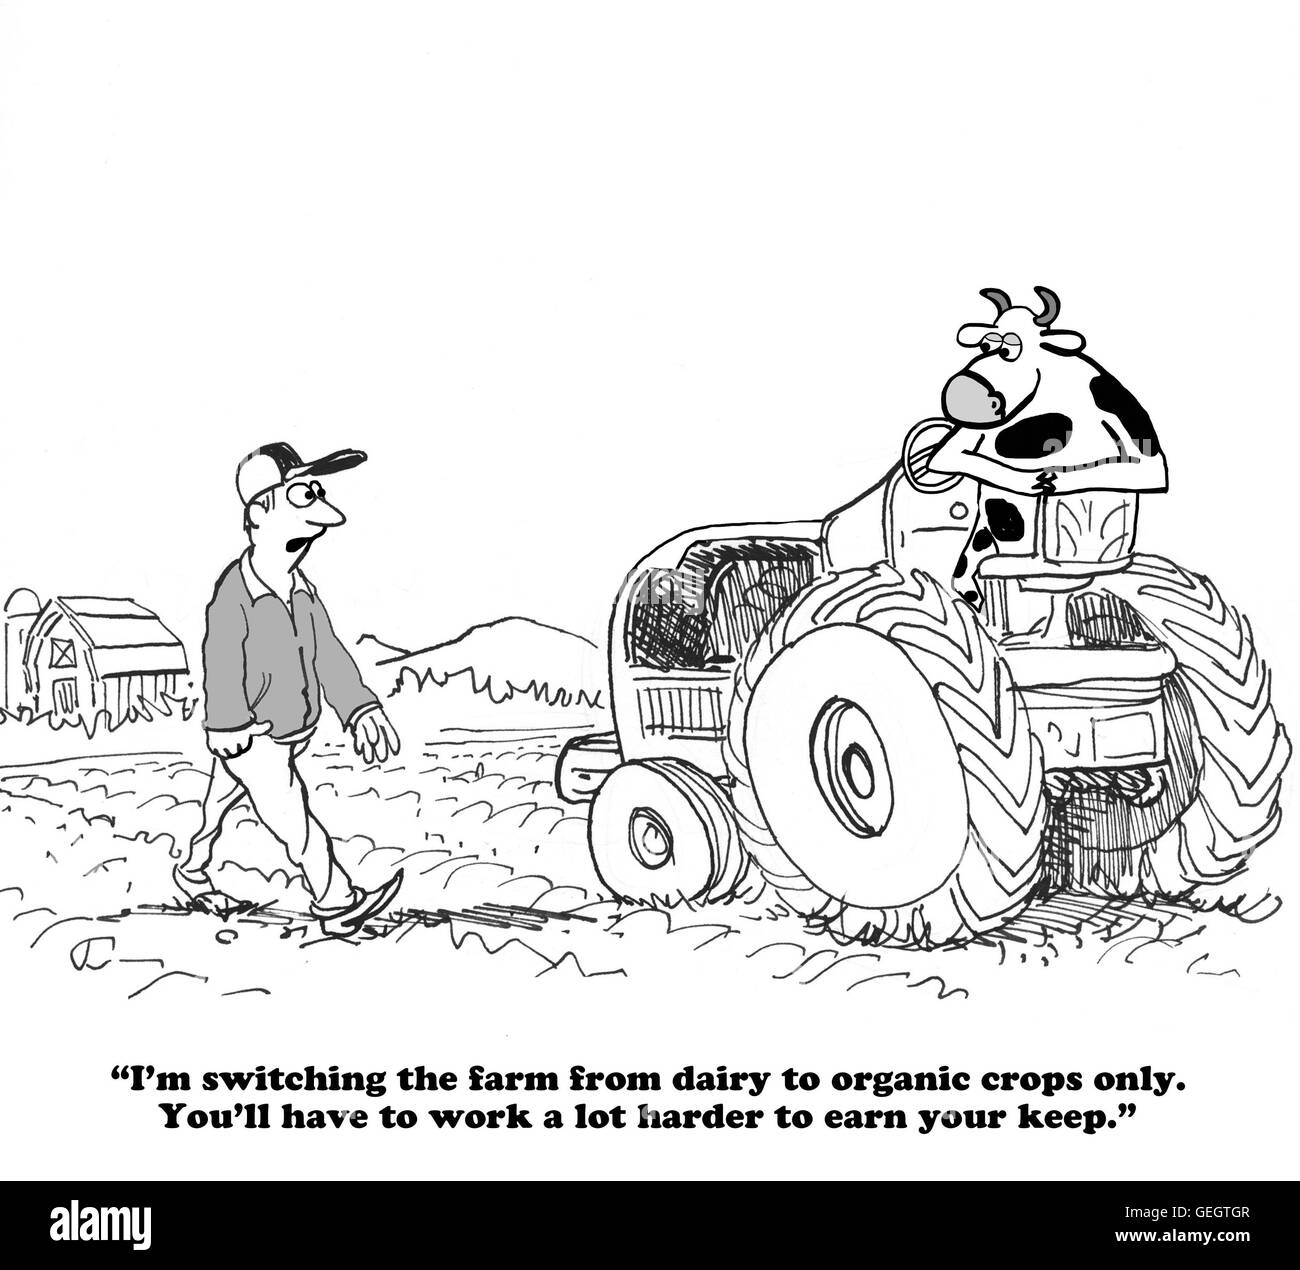 Farming cartoon about needing to work to earn your keep. Stock Photo